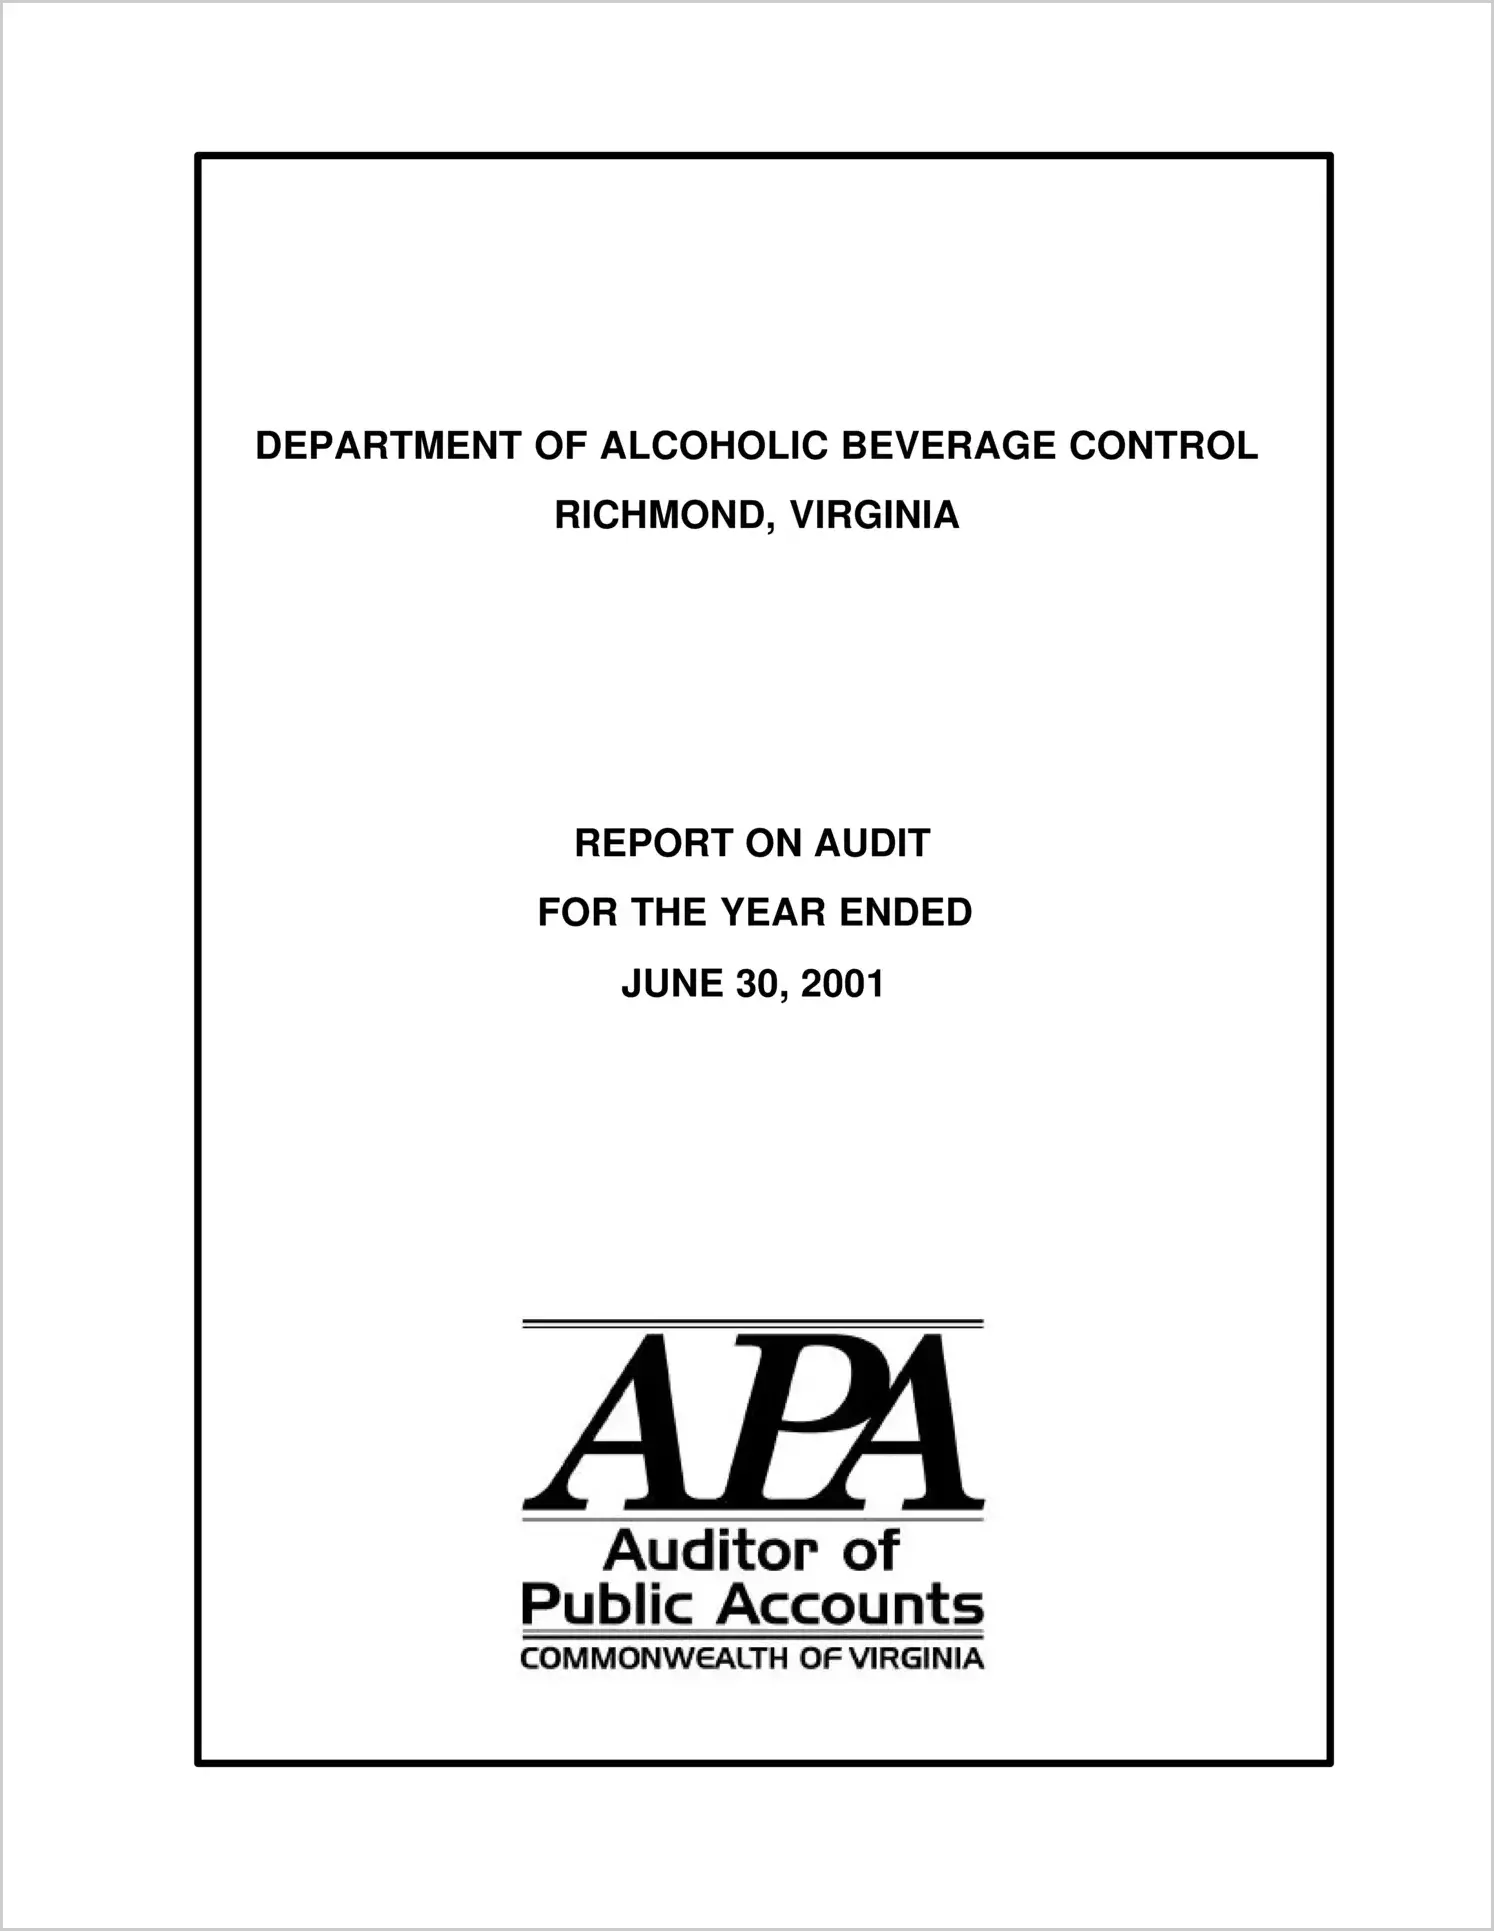 Department of Alcoholic Beverage Control for the year ended June 30, 2001